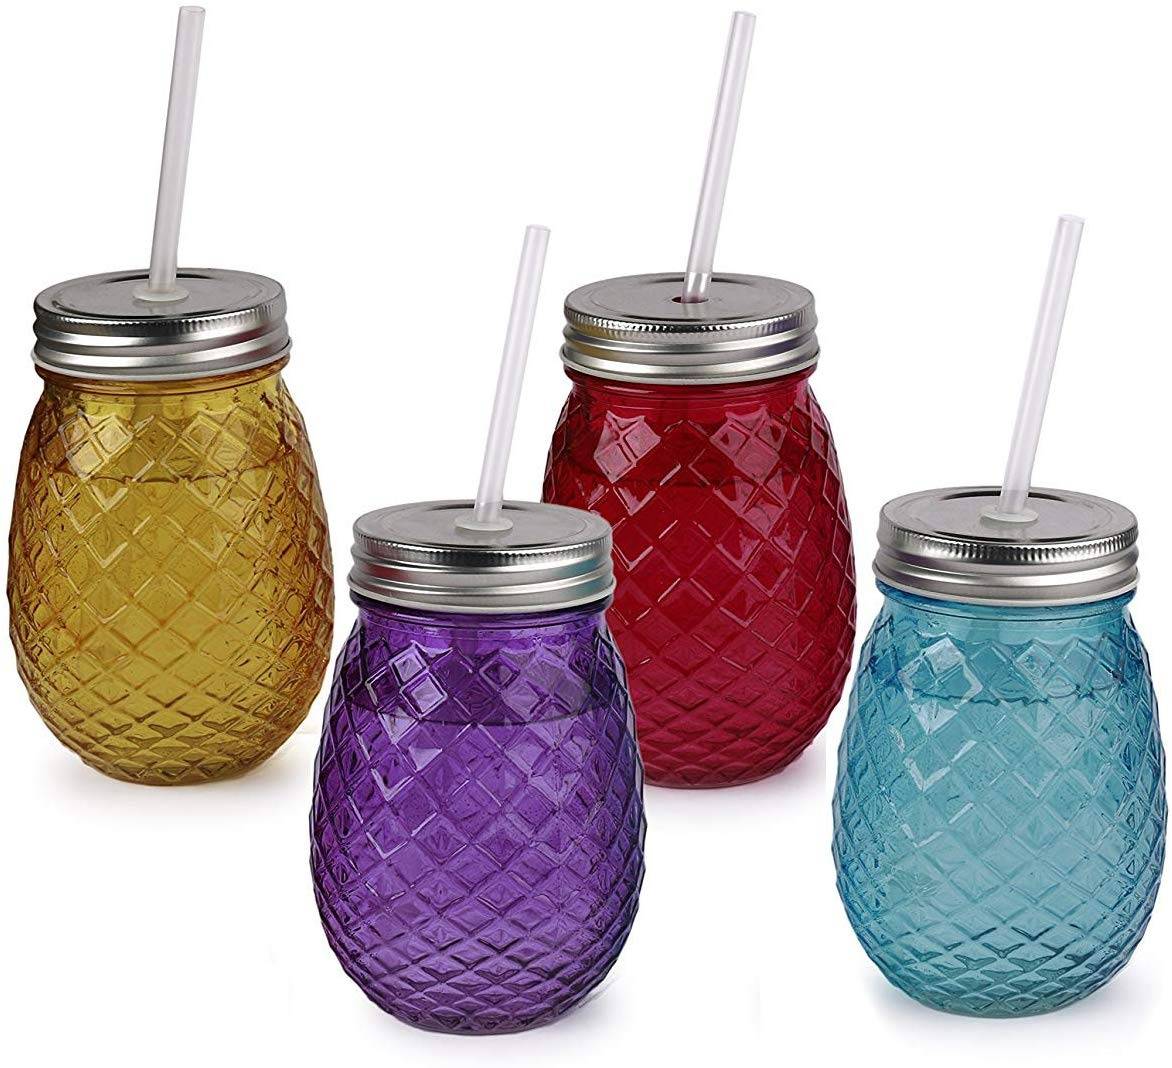 OEM/ODM Supplier Cream Jar - Pineapple Football Glass Drinking Mason Jar Set with Handle with lid and hole – Menbank